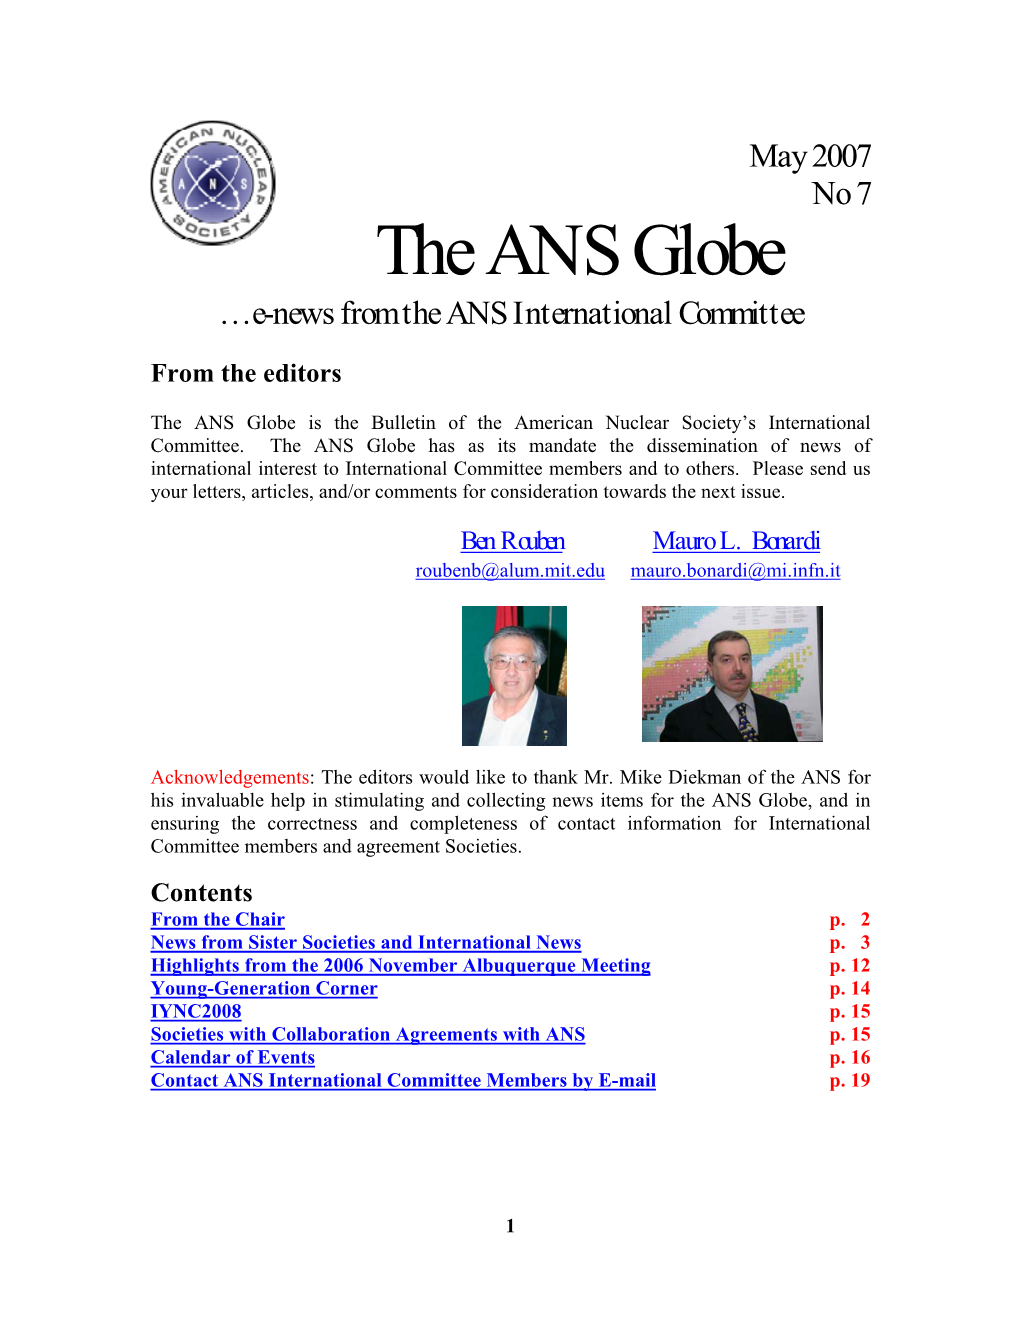 The ANS Globe …E-News from the ANS International Committee